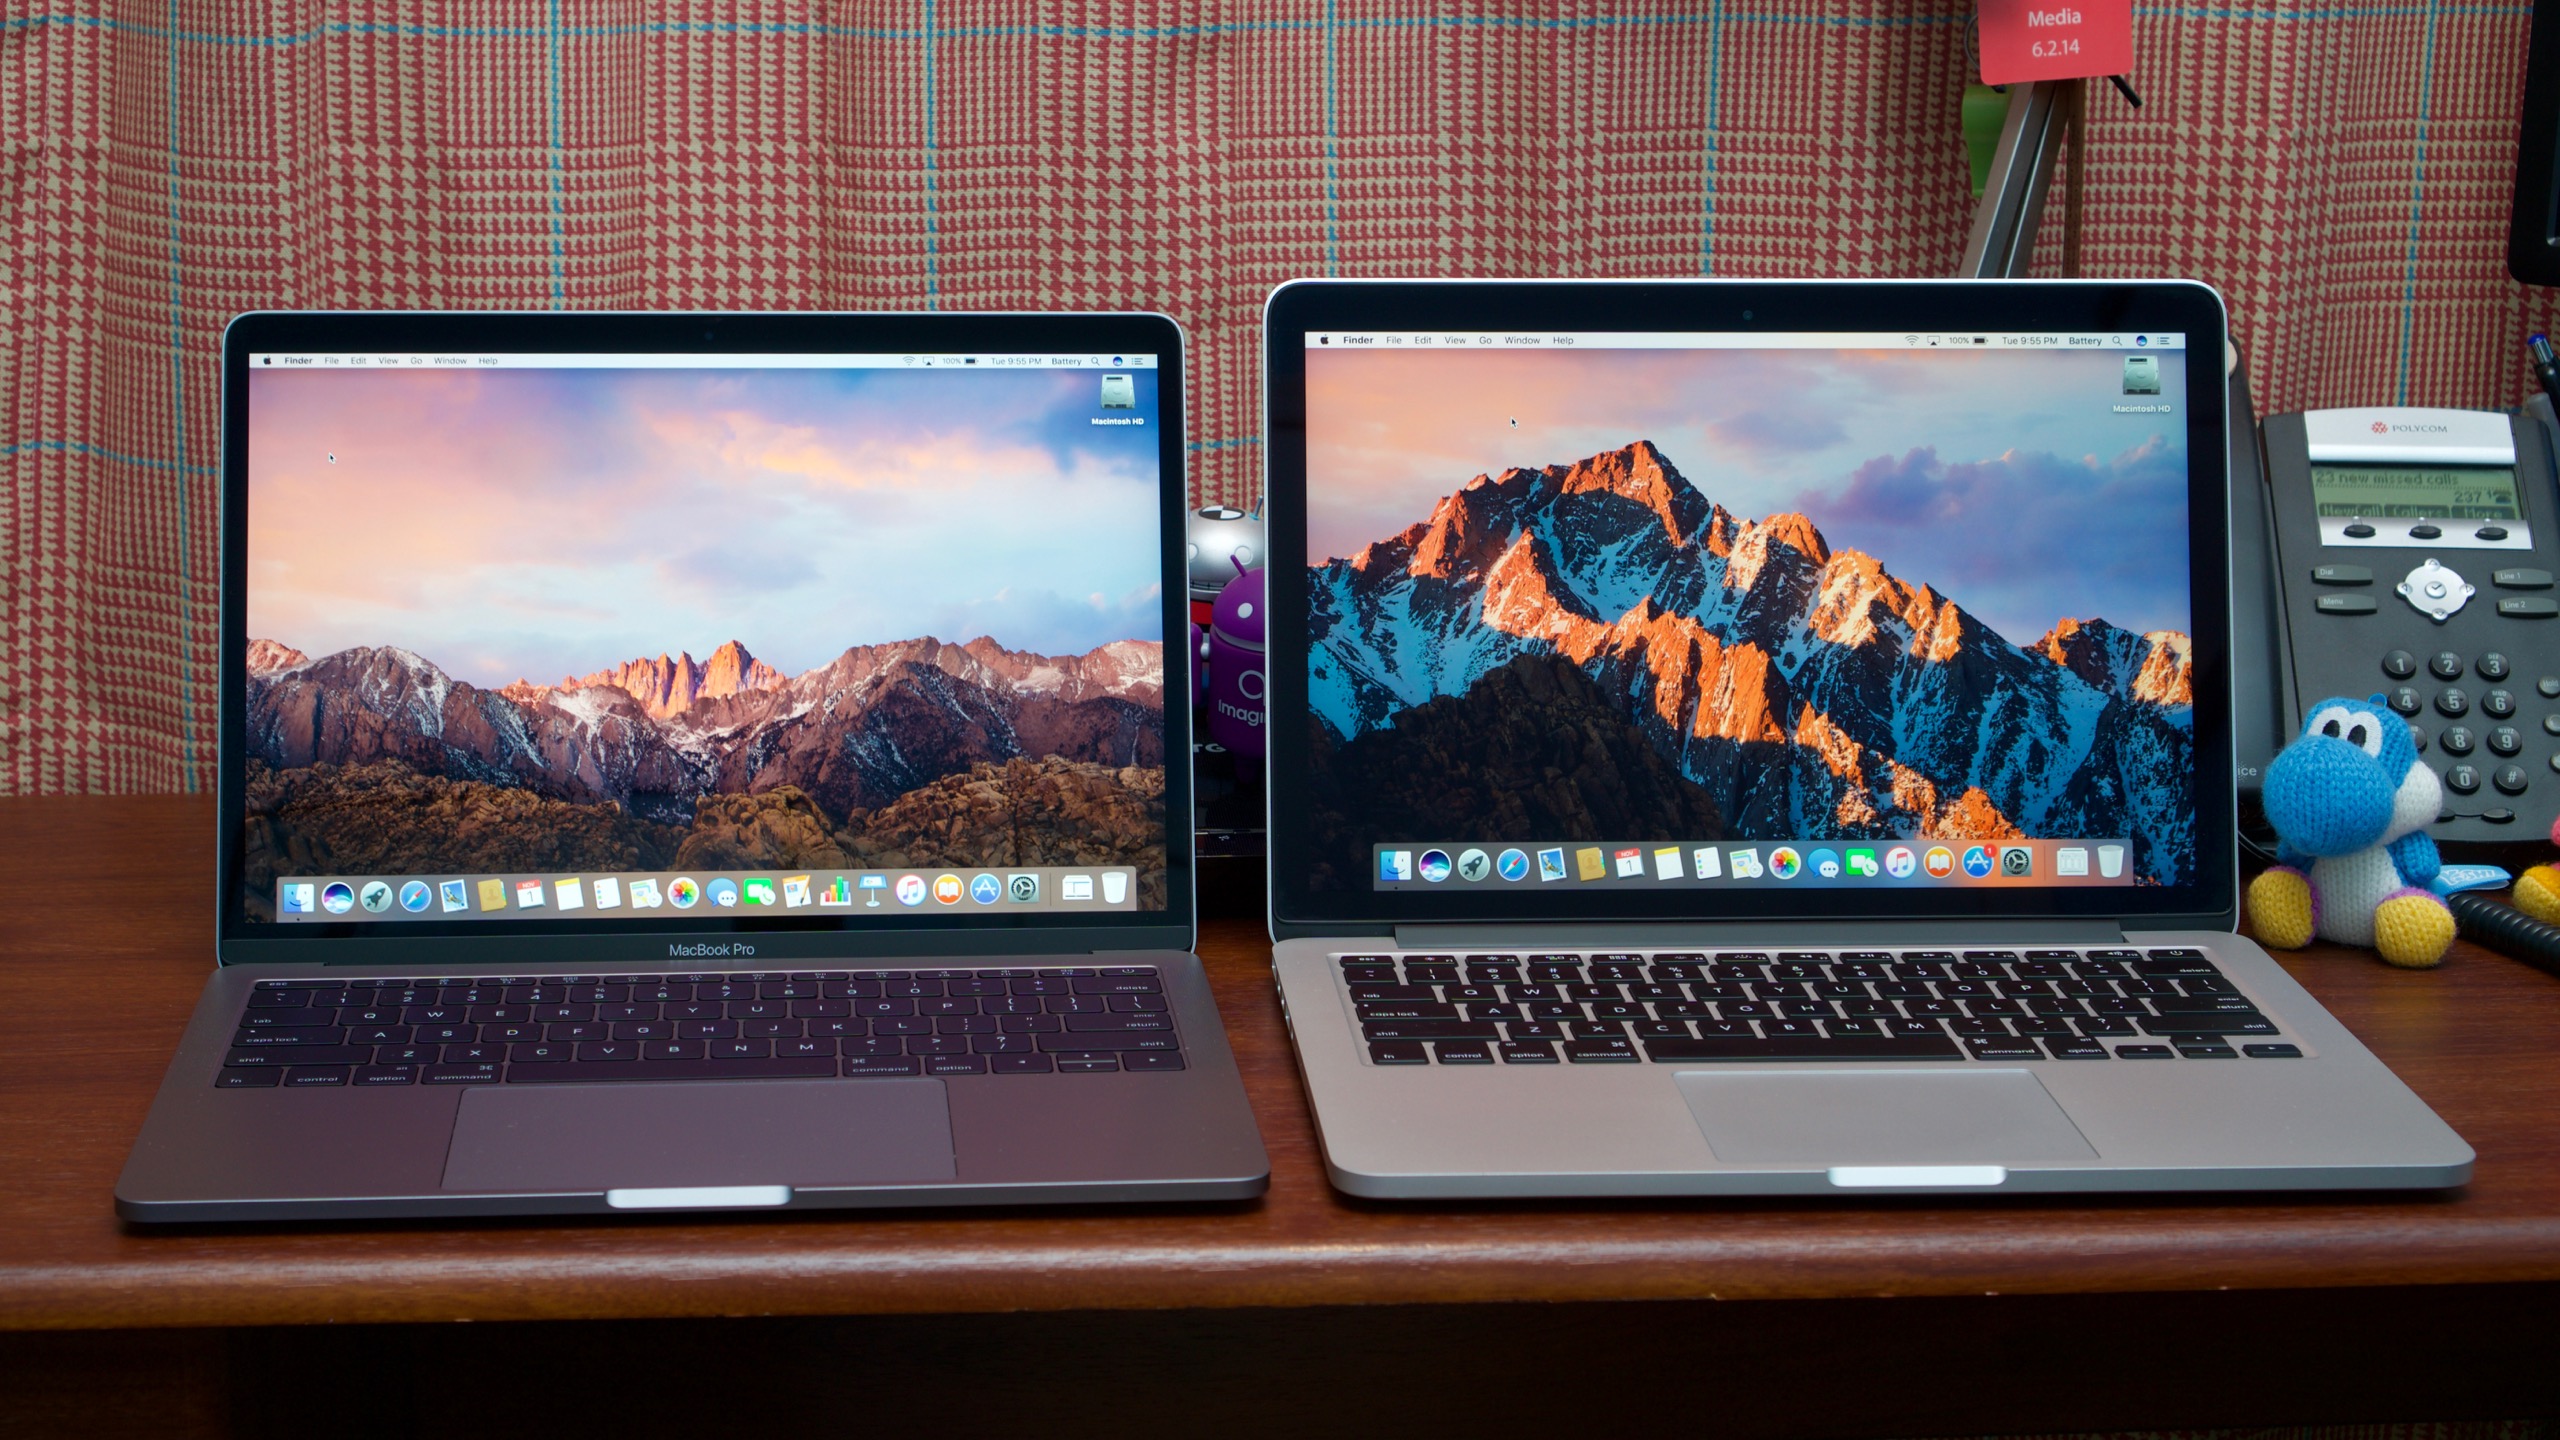 Are the MBP2020 13" bezels smaller than 2015 13" MBP? | MacRumors Forums